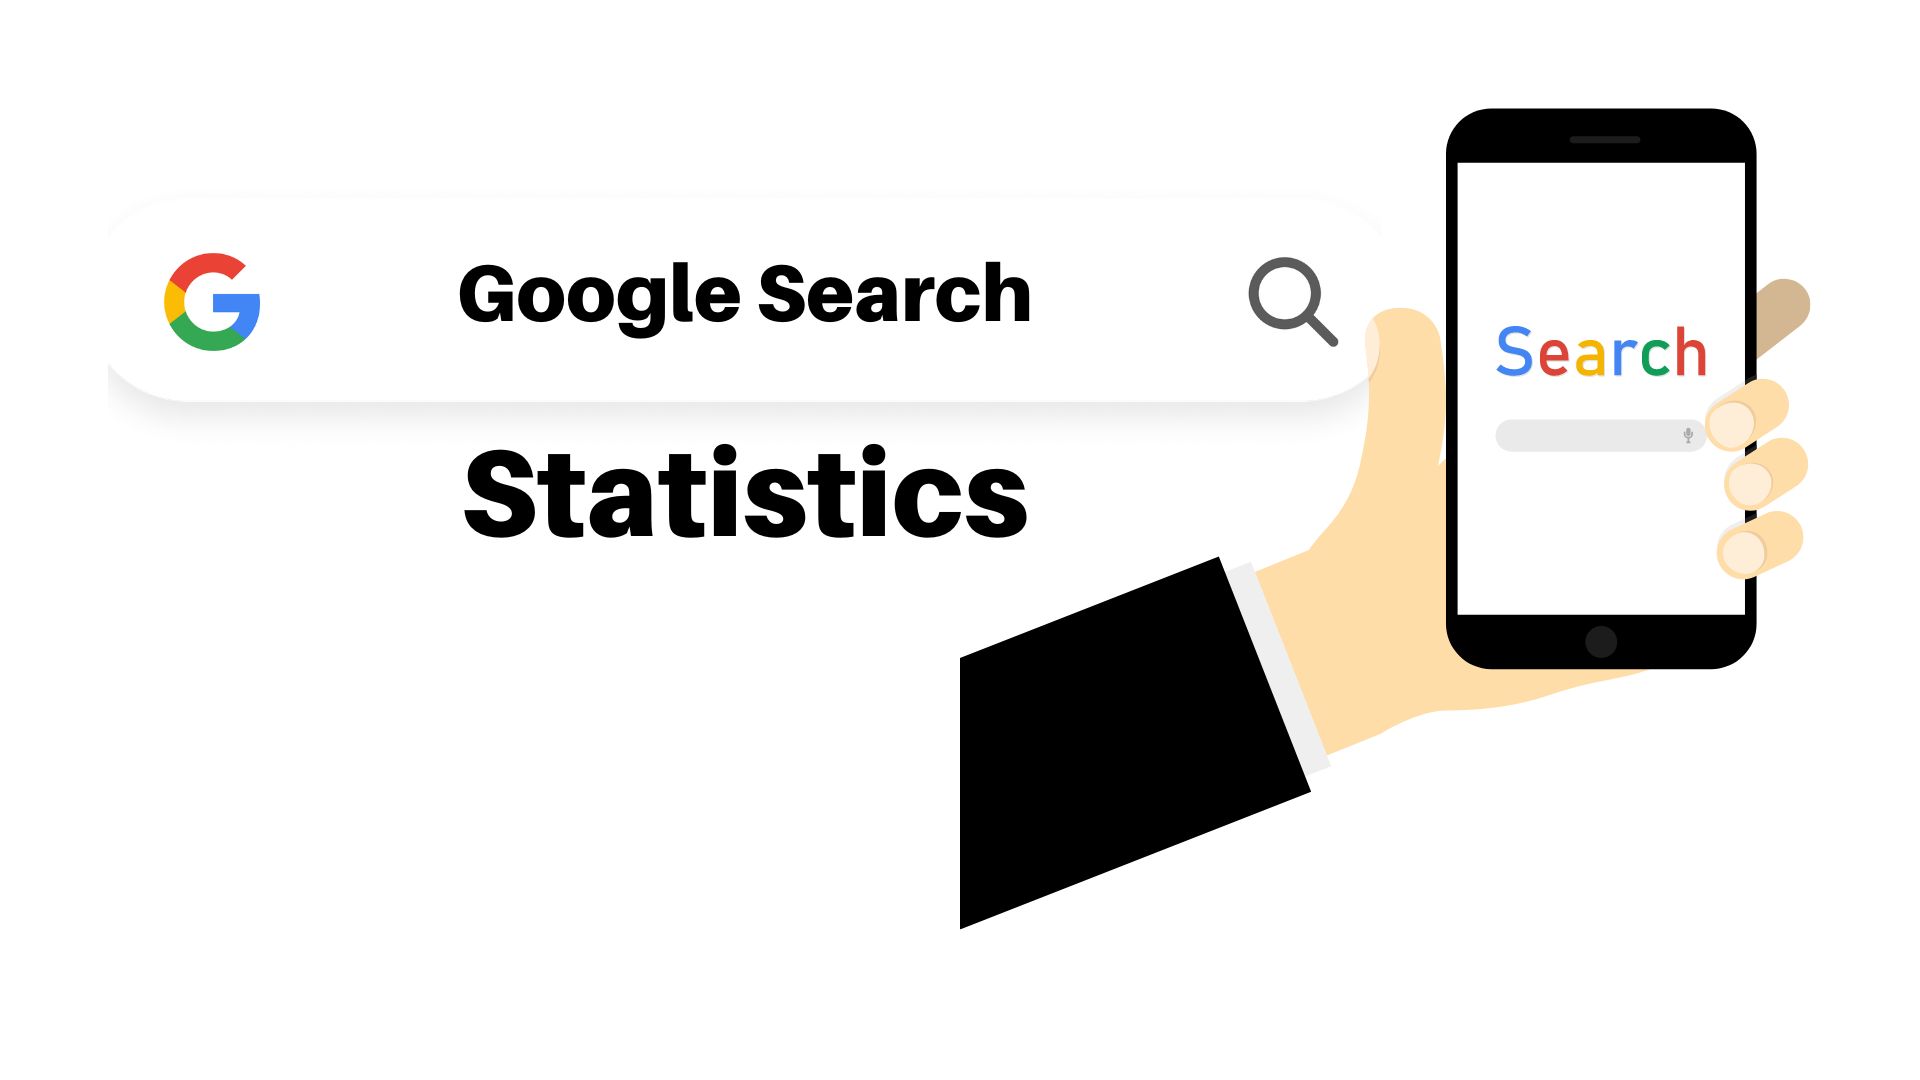 Google Search Statistics – By Market Share, Demographics, Country, Traffic Sources, Social Media Referral, User Behavior